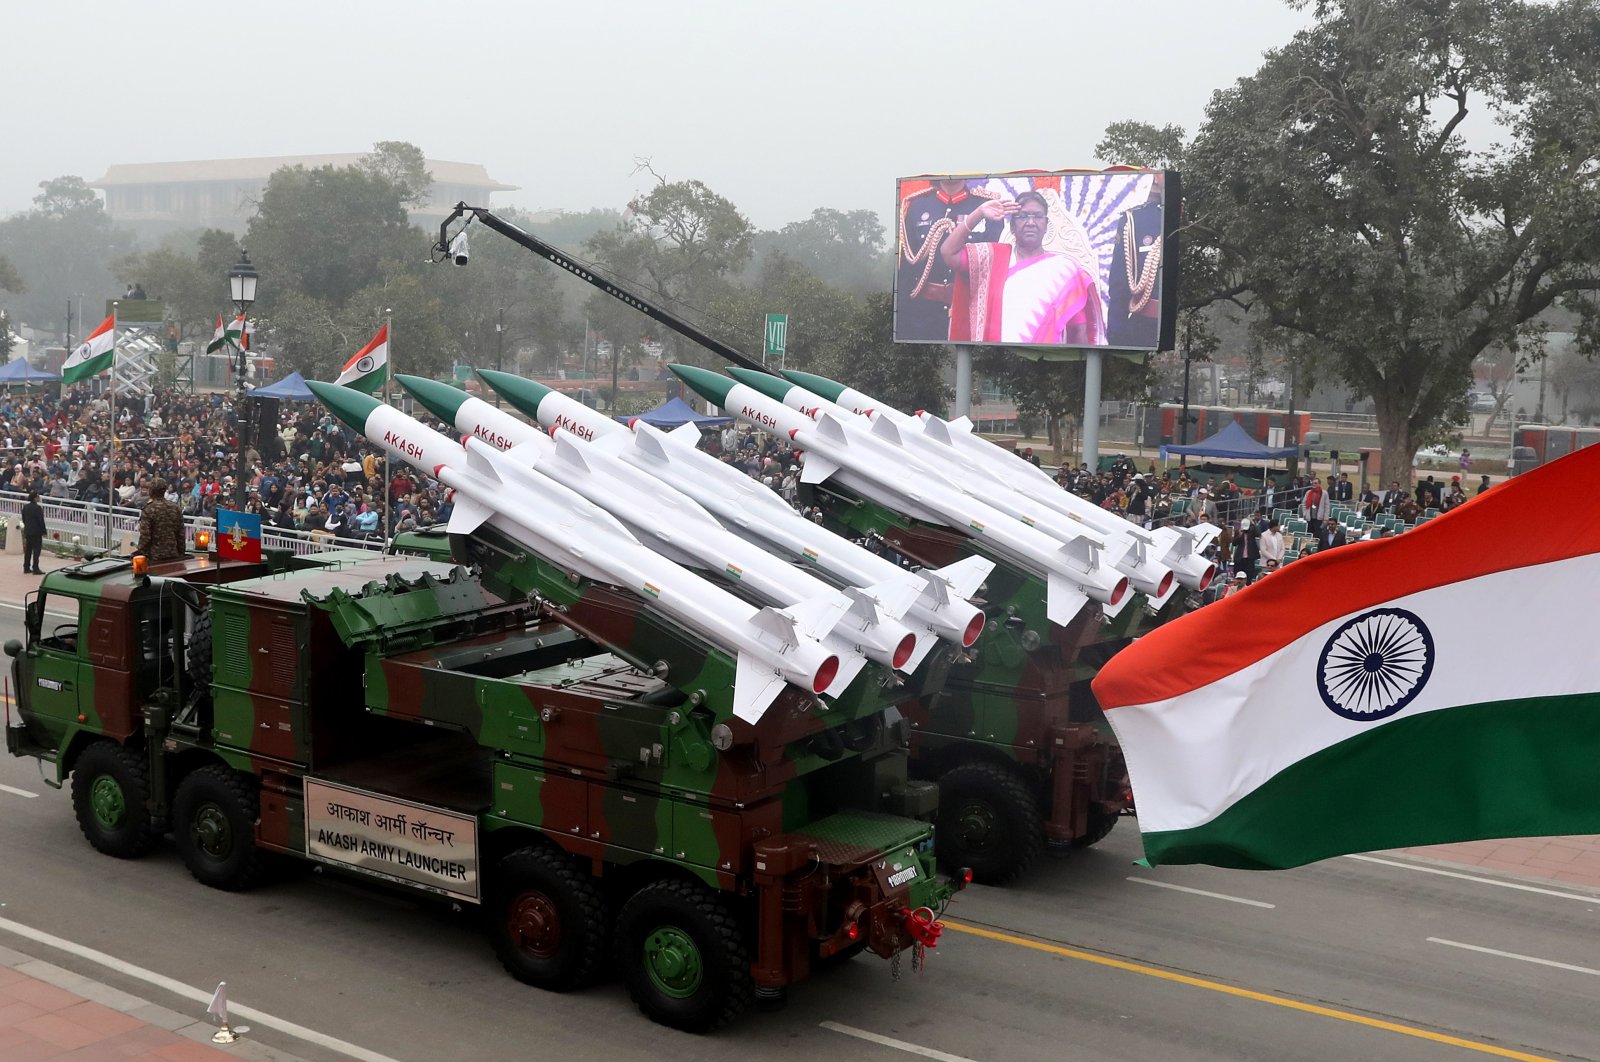 Indian Army&#039;s &#039;Akash&#039; rocket launching vehicles join a parade during the 74th Republic Day celebrations, New Delhi, India, Jan. 26, 2023. (EPA Photo)